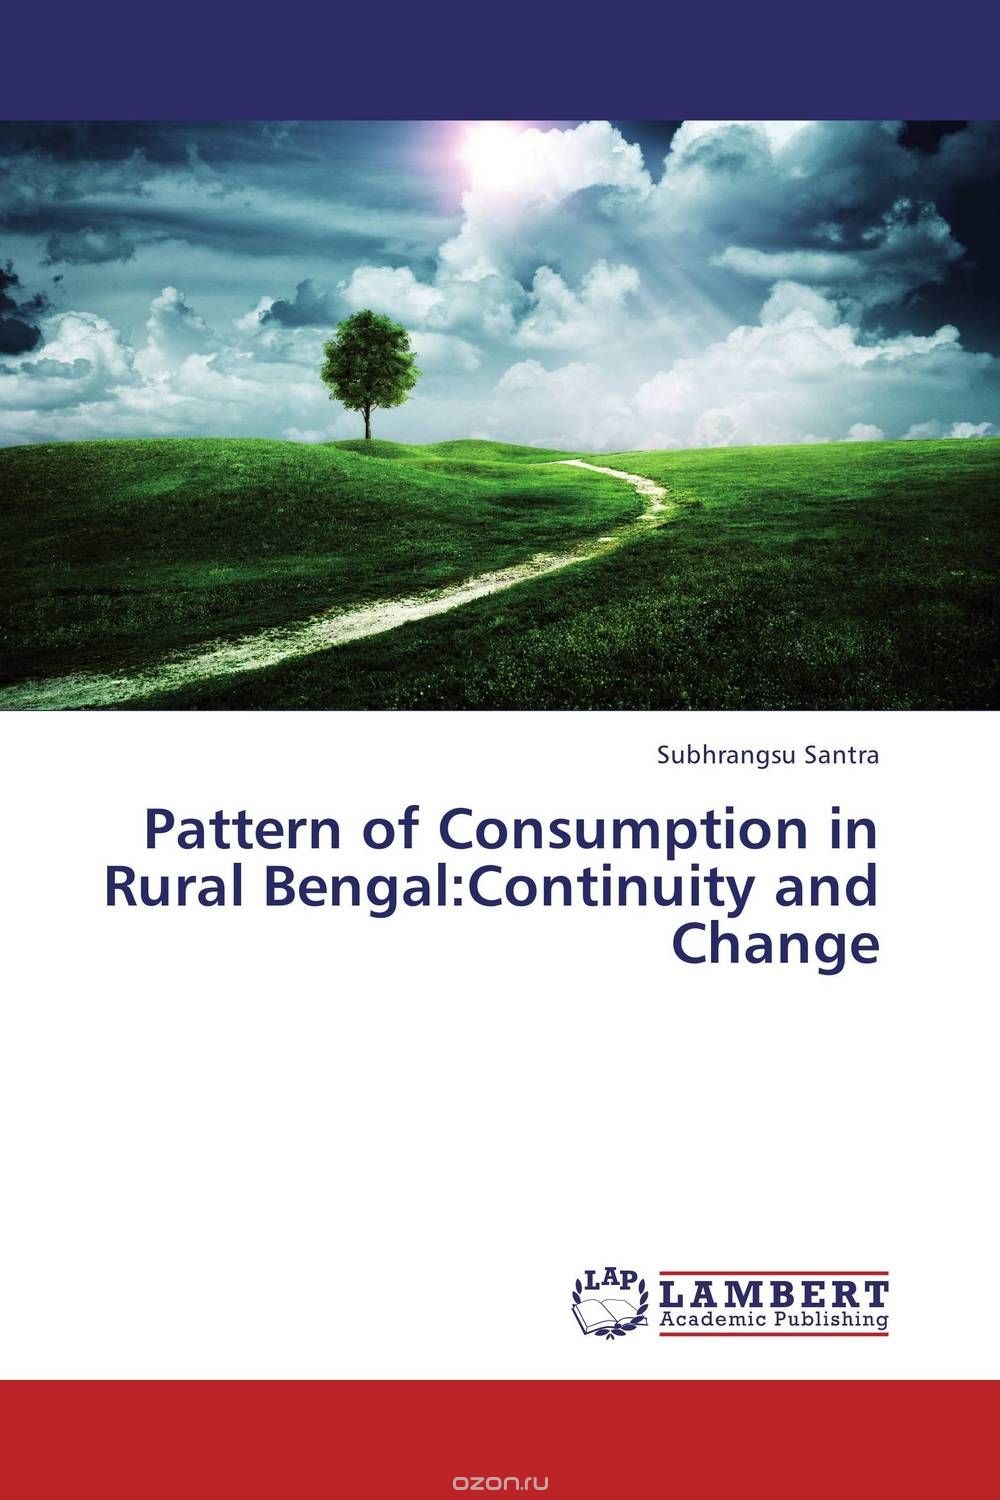 Скачать книгу "Pattern of Consumption in Rural Bengal:Continuity and Change"